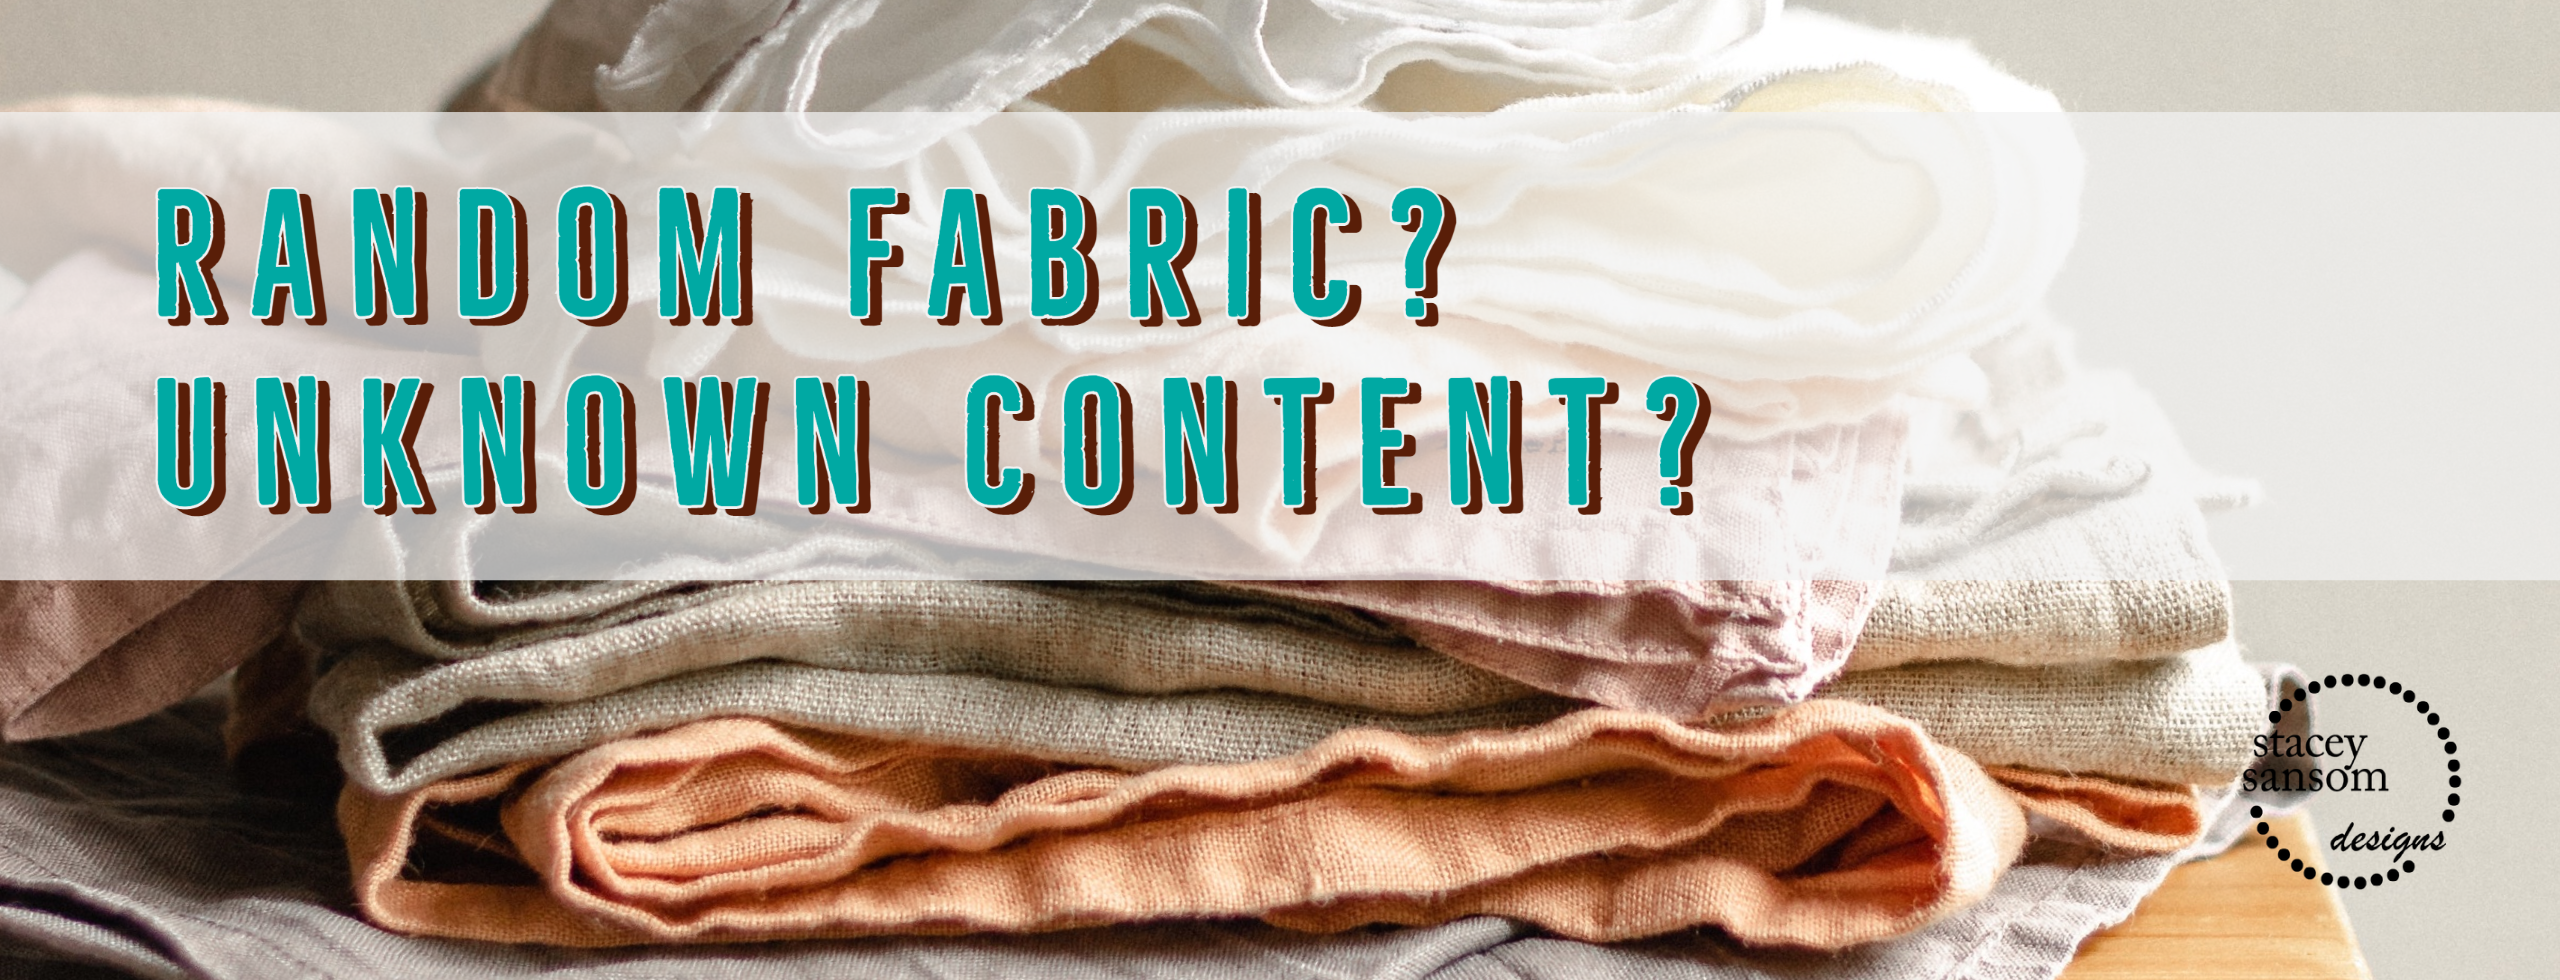 Article: Random Fabric? Unknown Content? | Stacey Sansom Designs